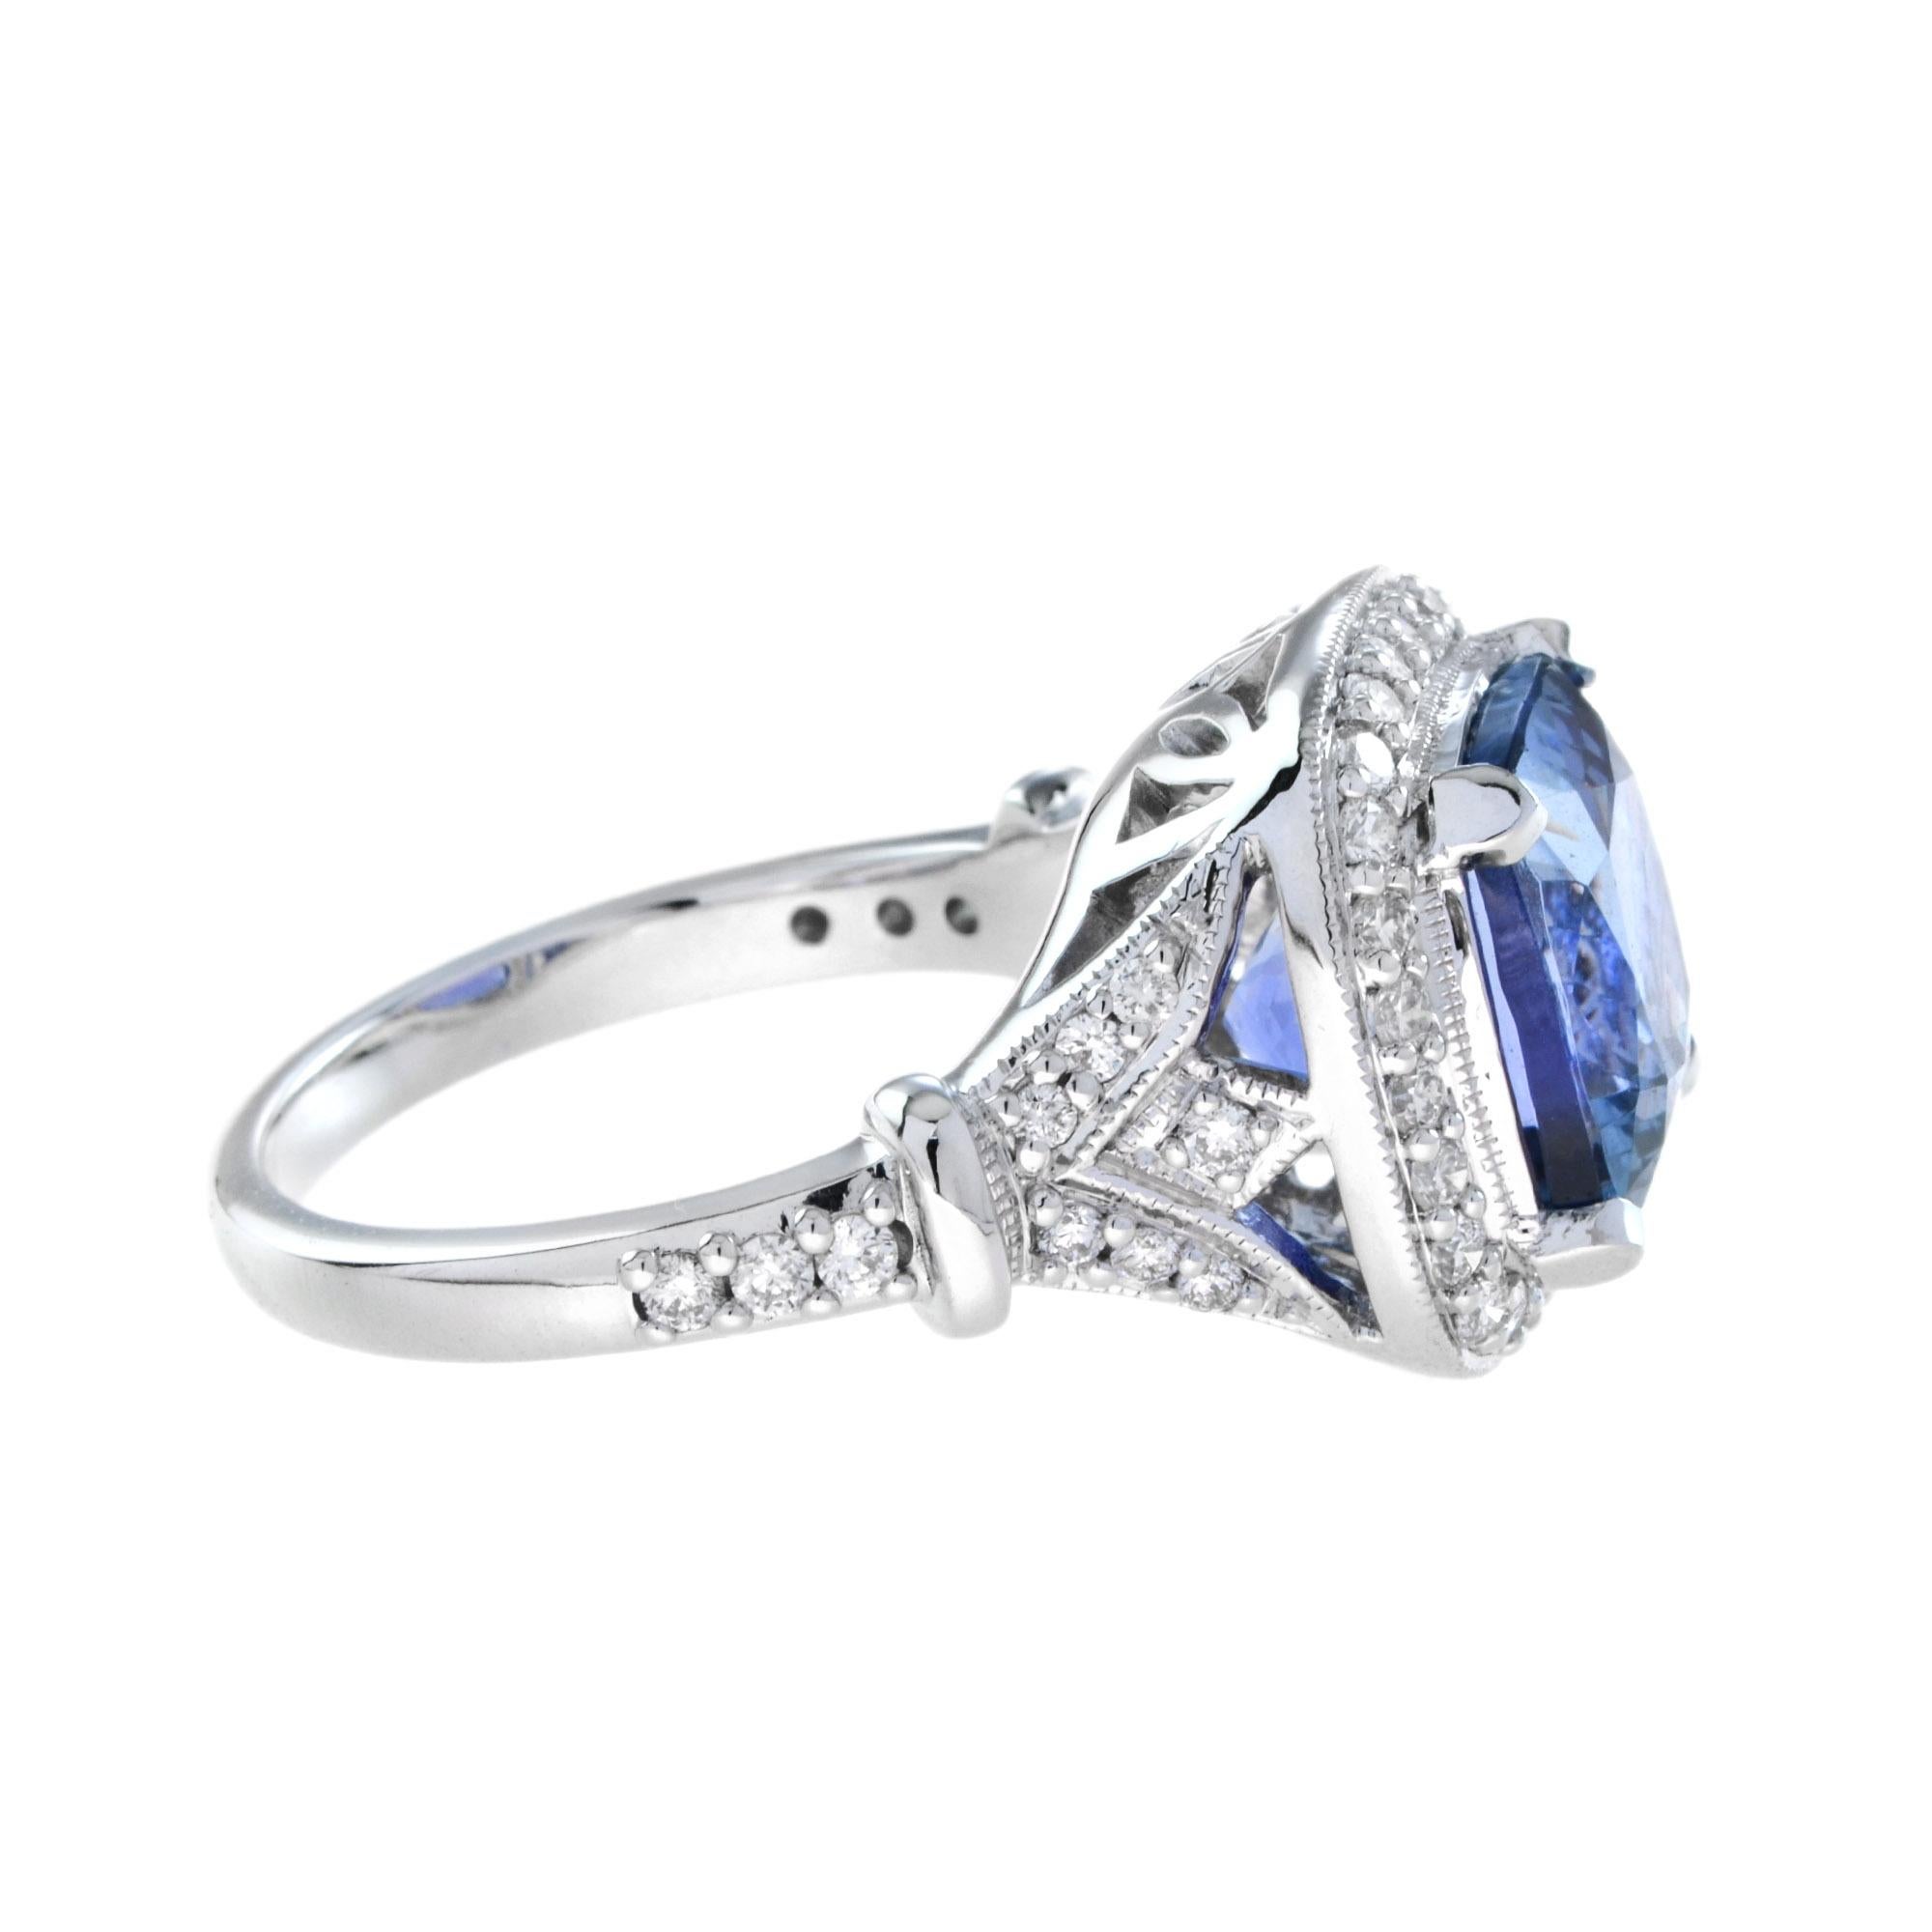 Women's Certified 6.68 Ct. Cushion Tanzanite Diamond Engagement Ring in 18K White Gold For Sale